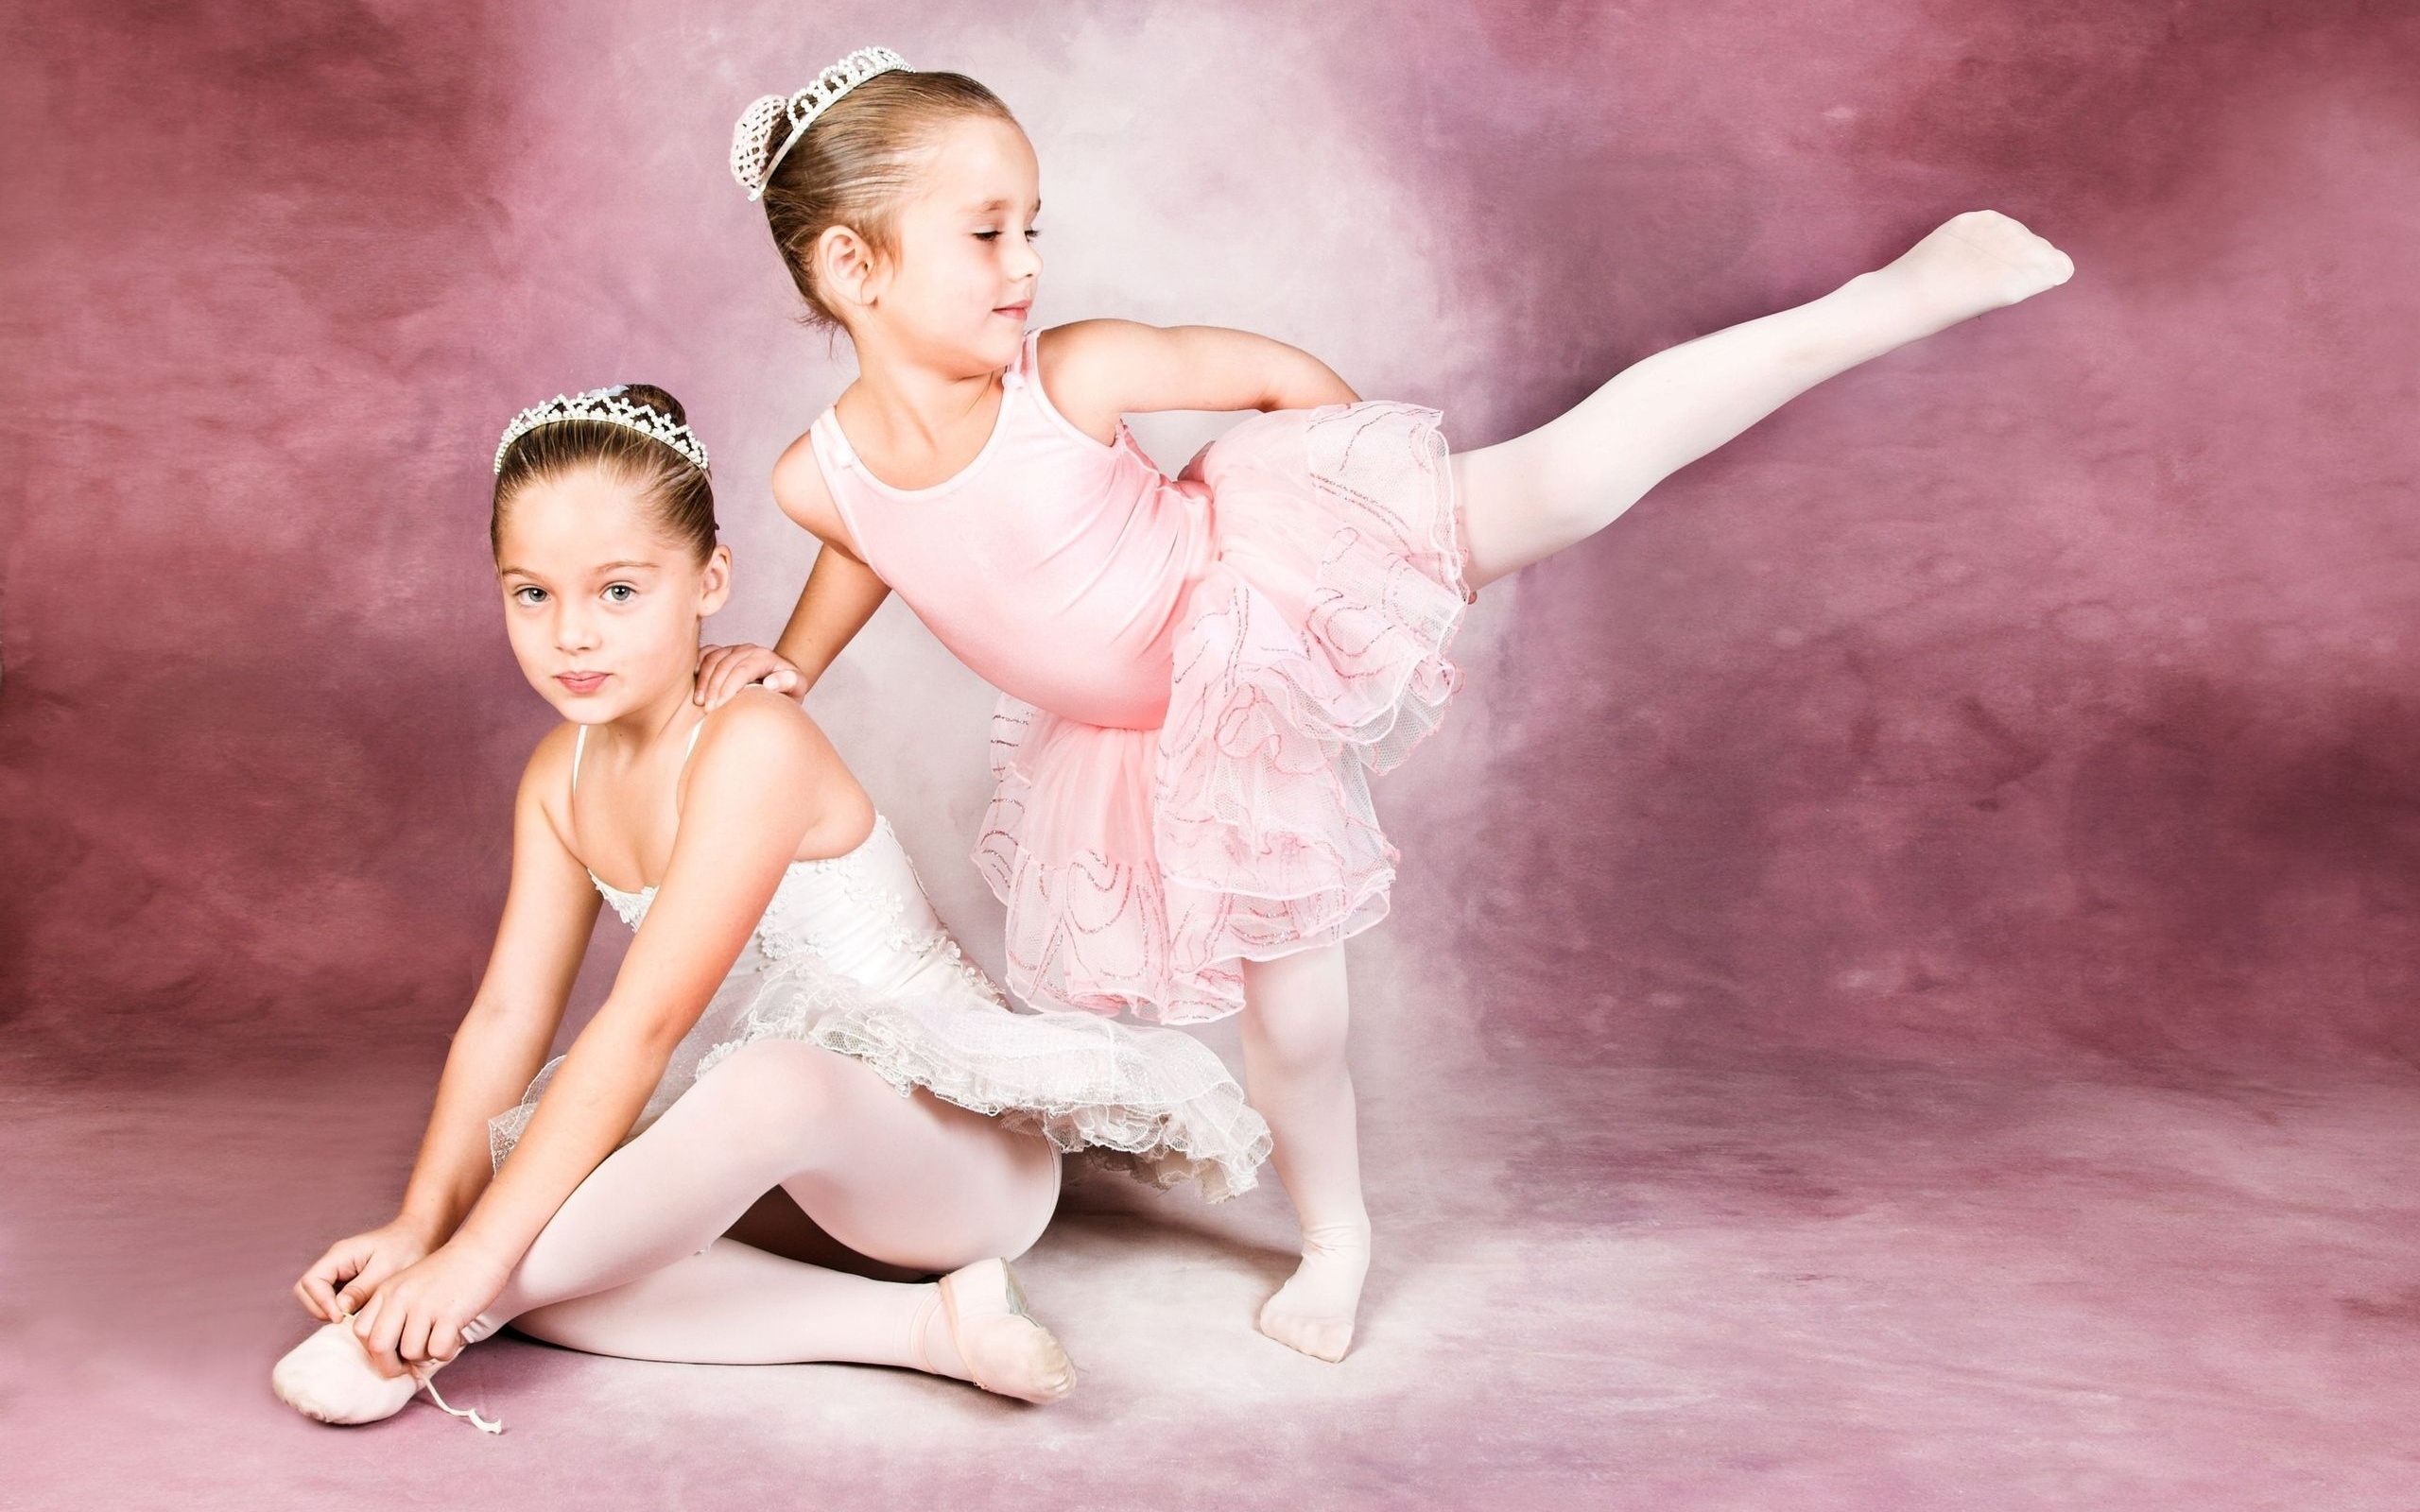 Two young ballerina wallpapers and images - wallpapers ...